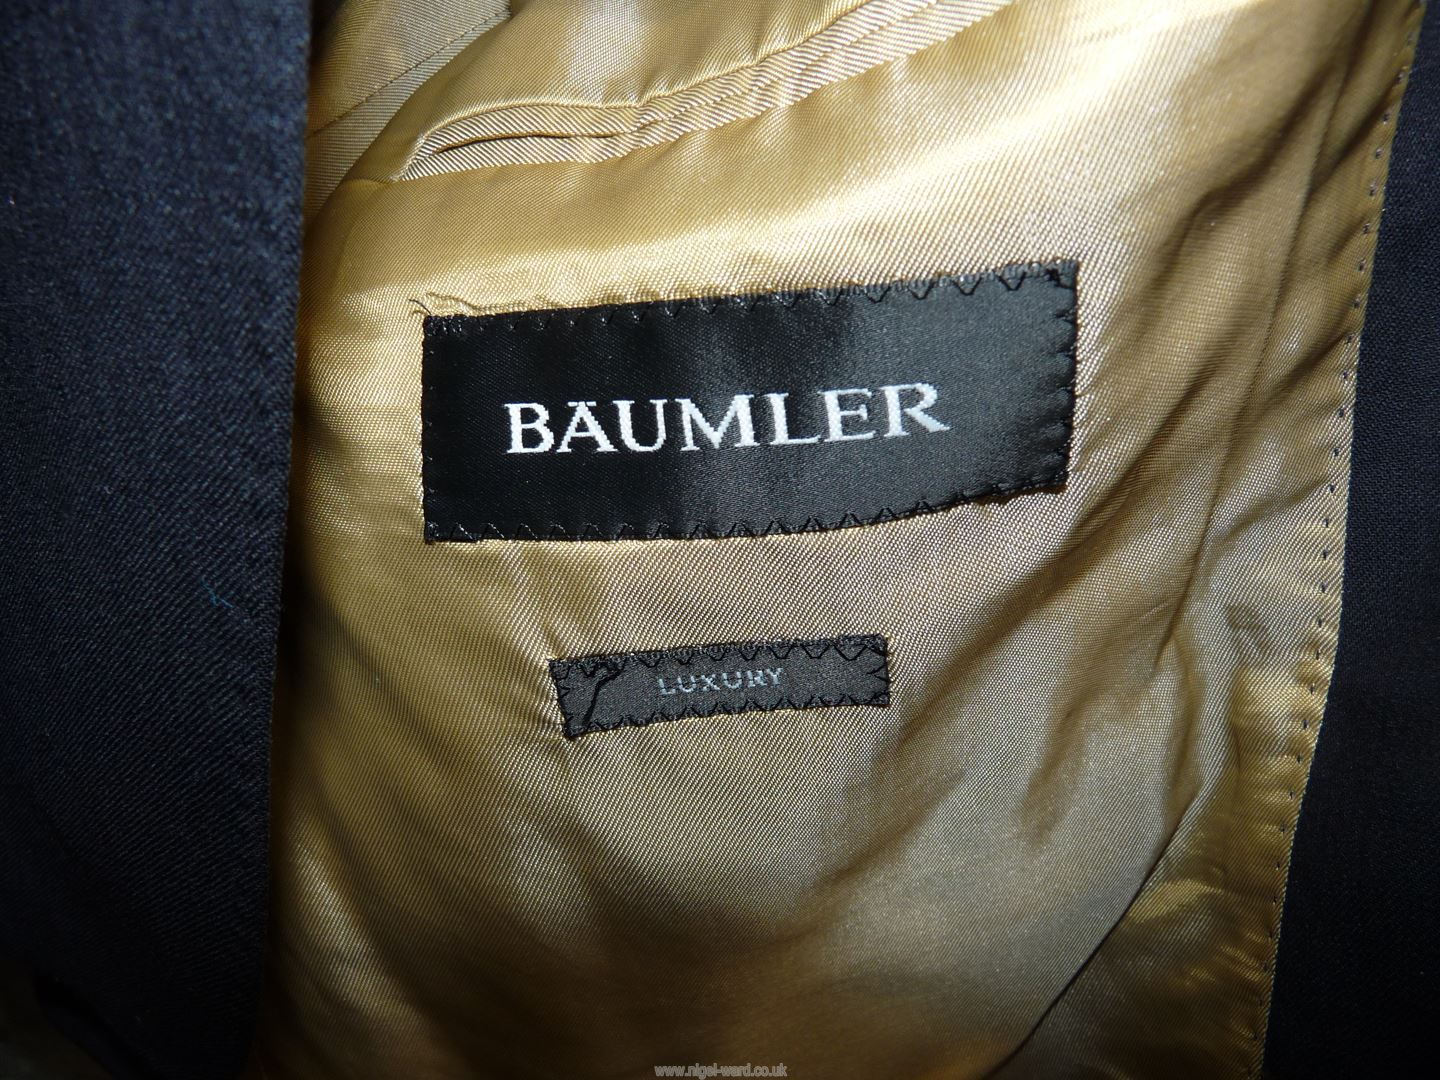 Two gents Jackets - one Daks wool and the other Baumler navy blue, size 56. - Image 3 of 3